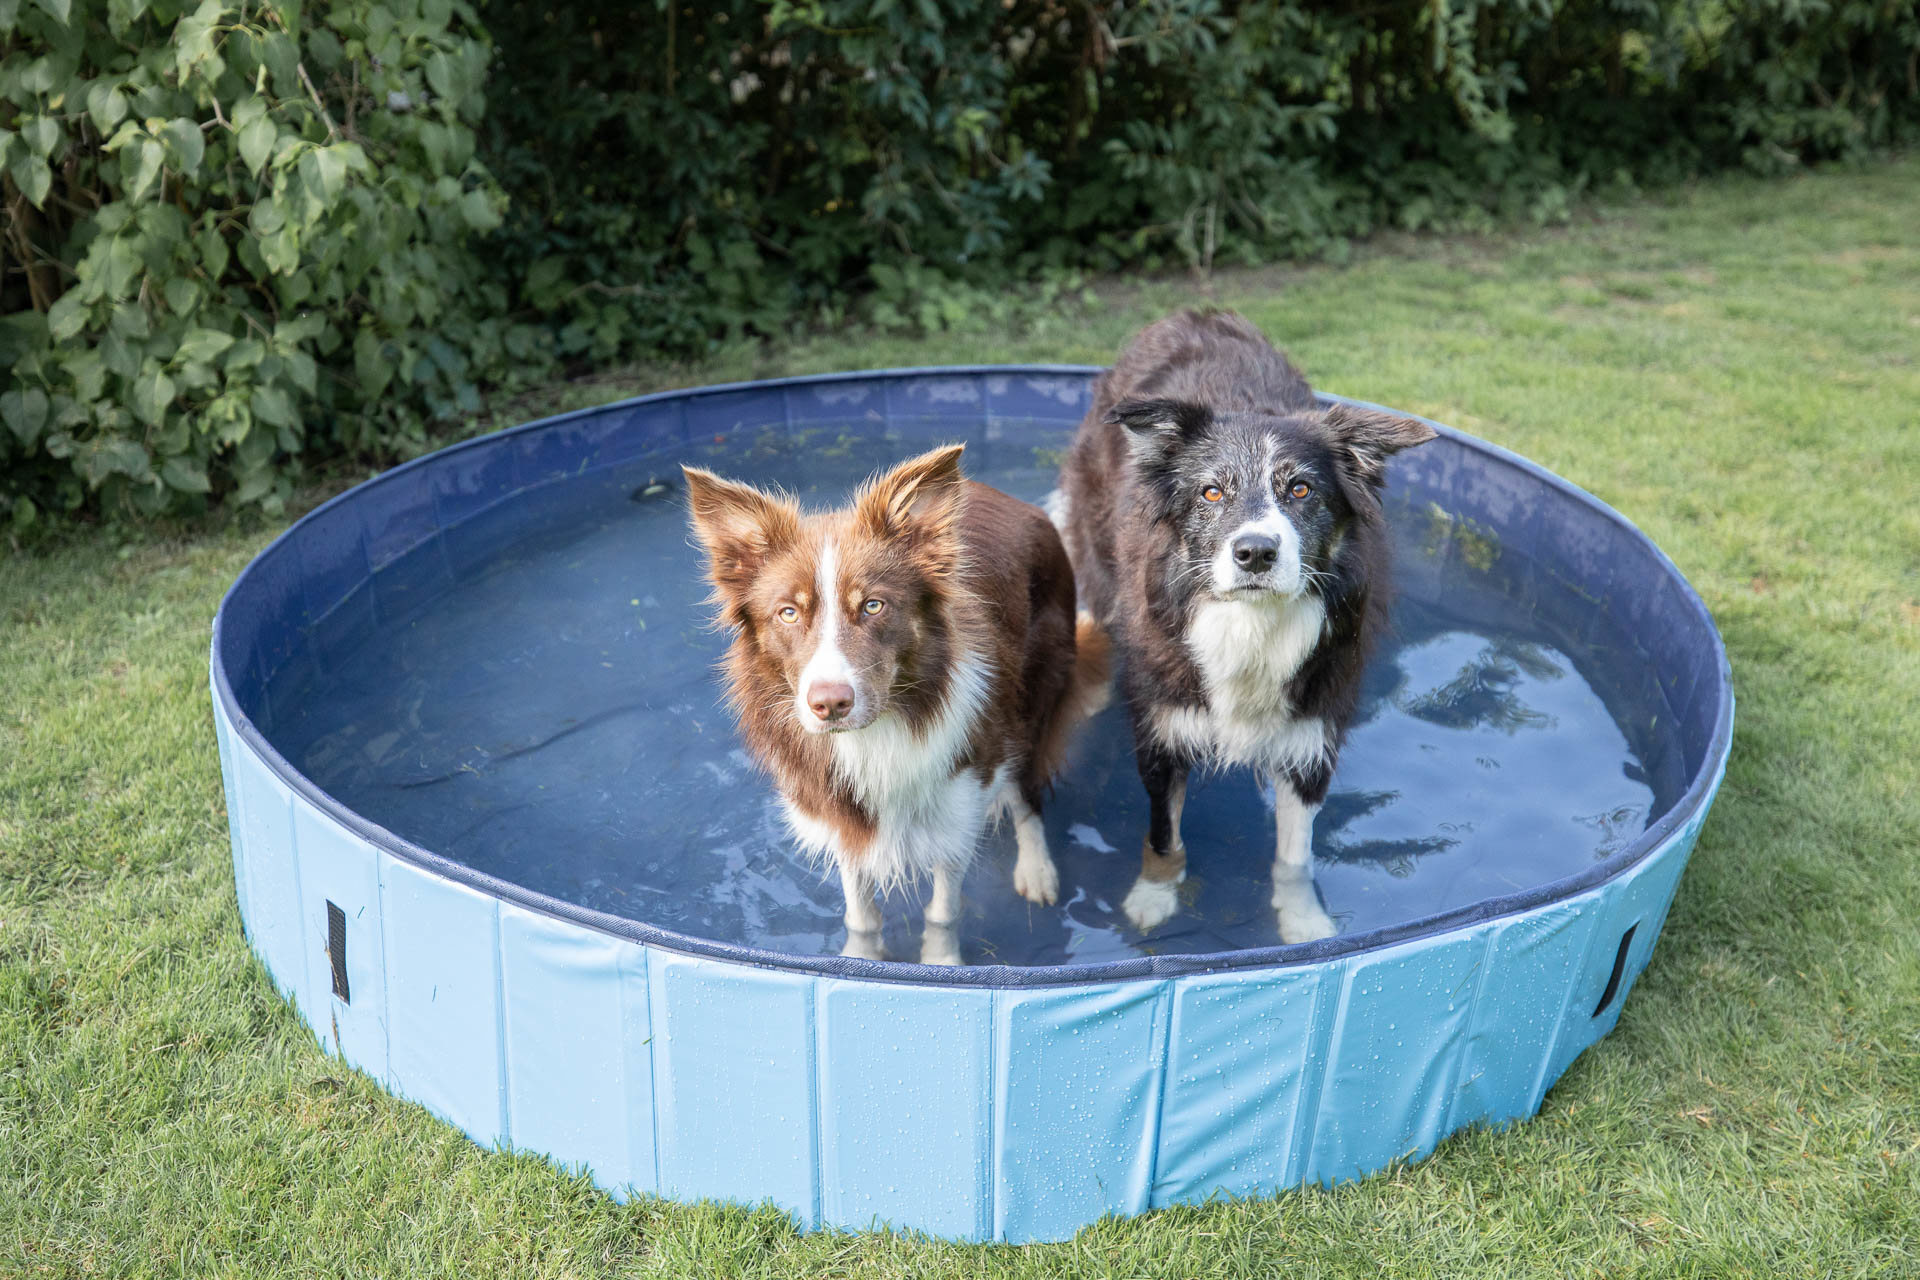 TRIXIE 63" Outdoor Splash Pool for Dogs, Foldable Playpen, Bathtub, Blue, XX-Large - image 3 of 8